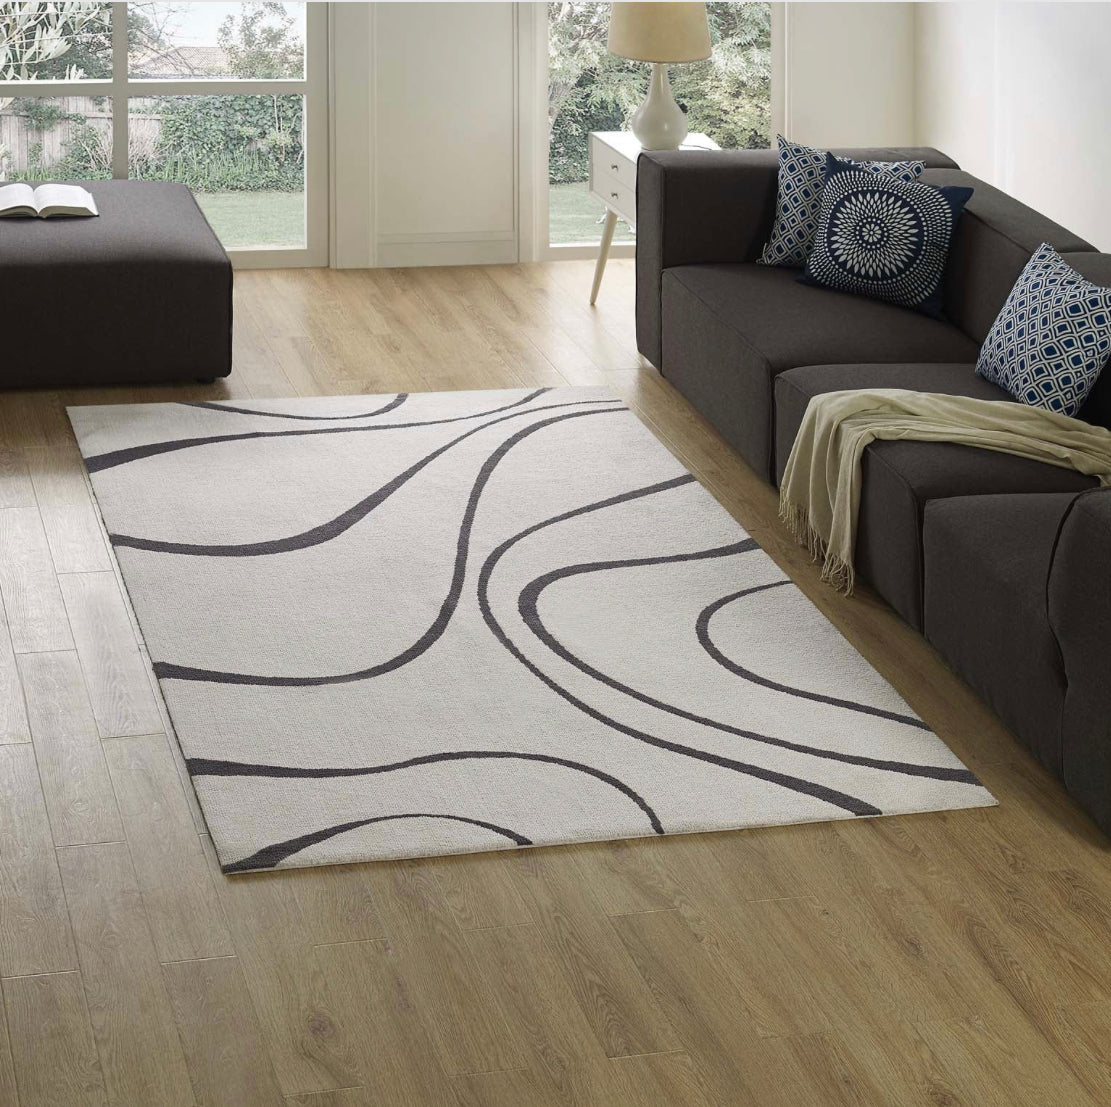 Therese Abstract Swirl 8X10 Area Rug Ivory and Charcoal